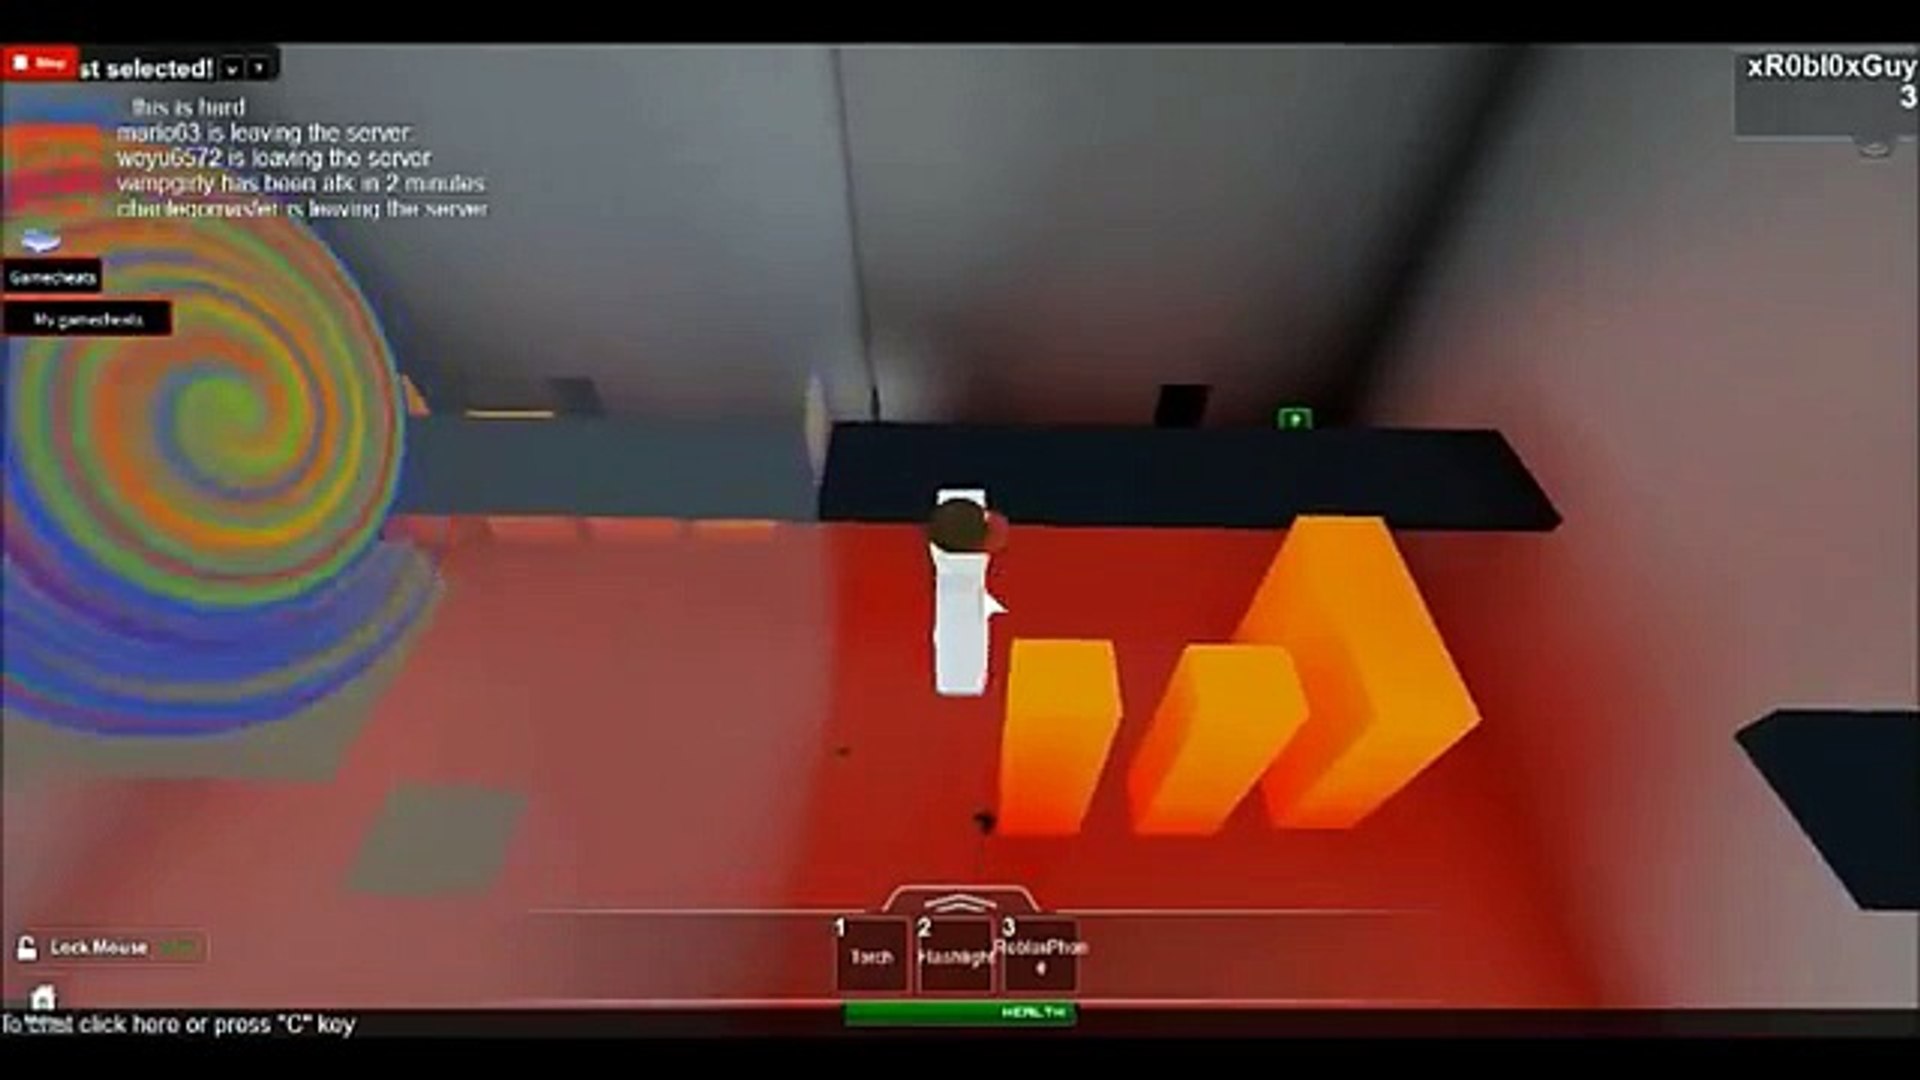 Roblox The Mirror Game Walkthrough Stages 1 5 Video Dailymotion - roblox mirror game